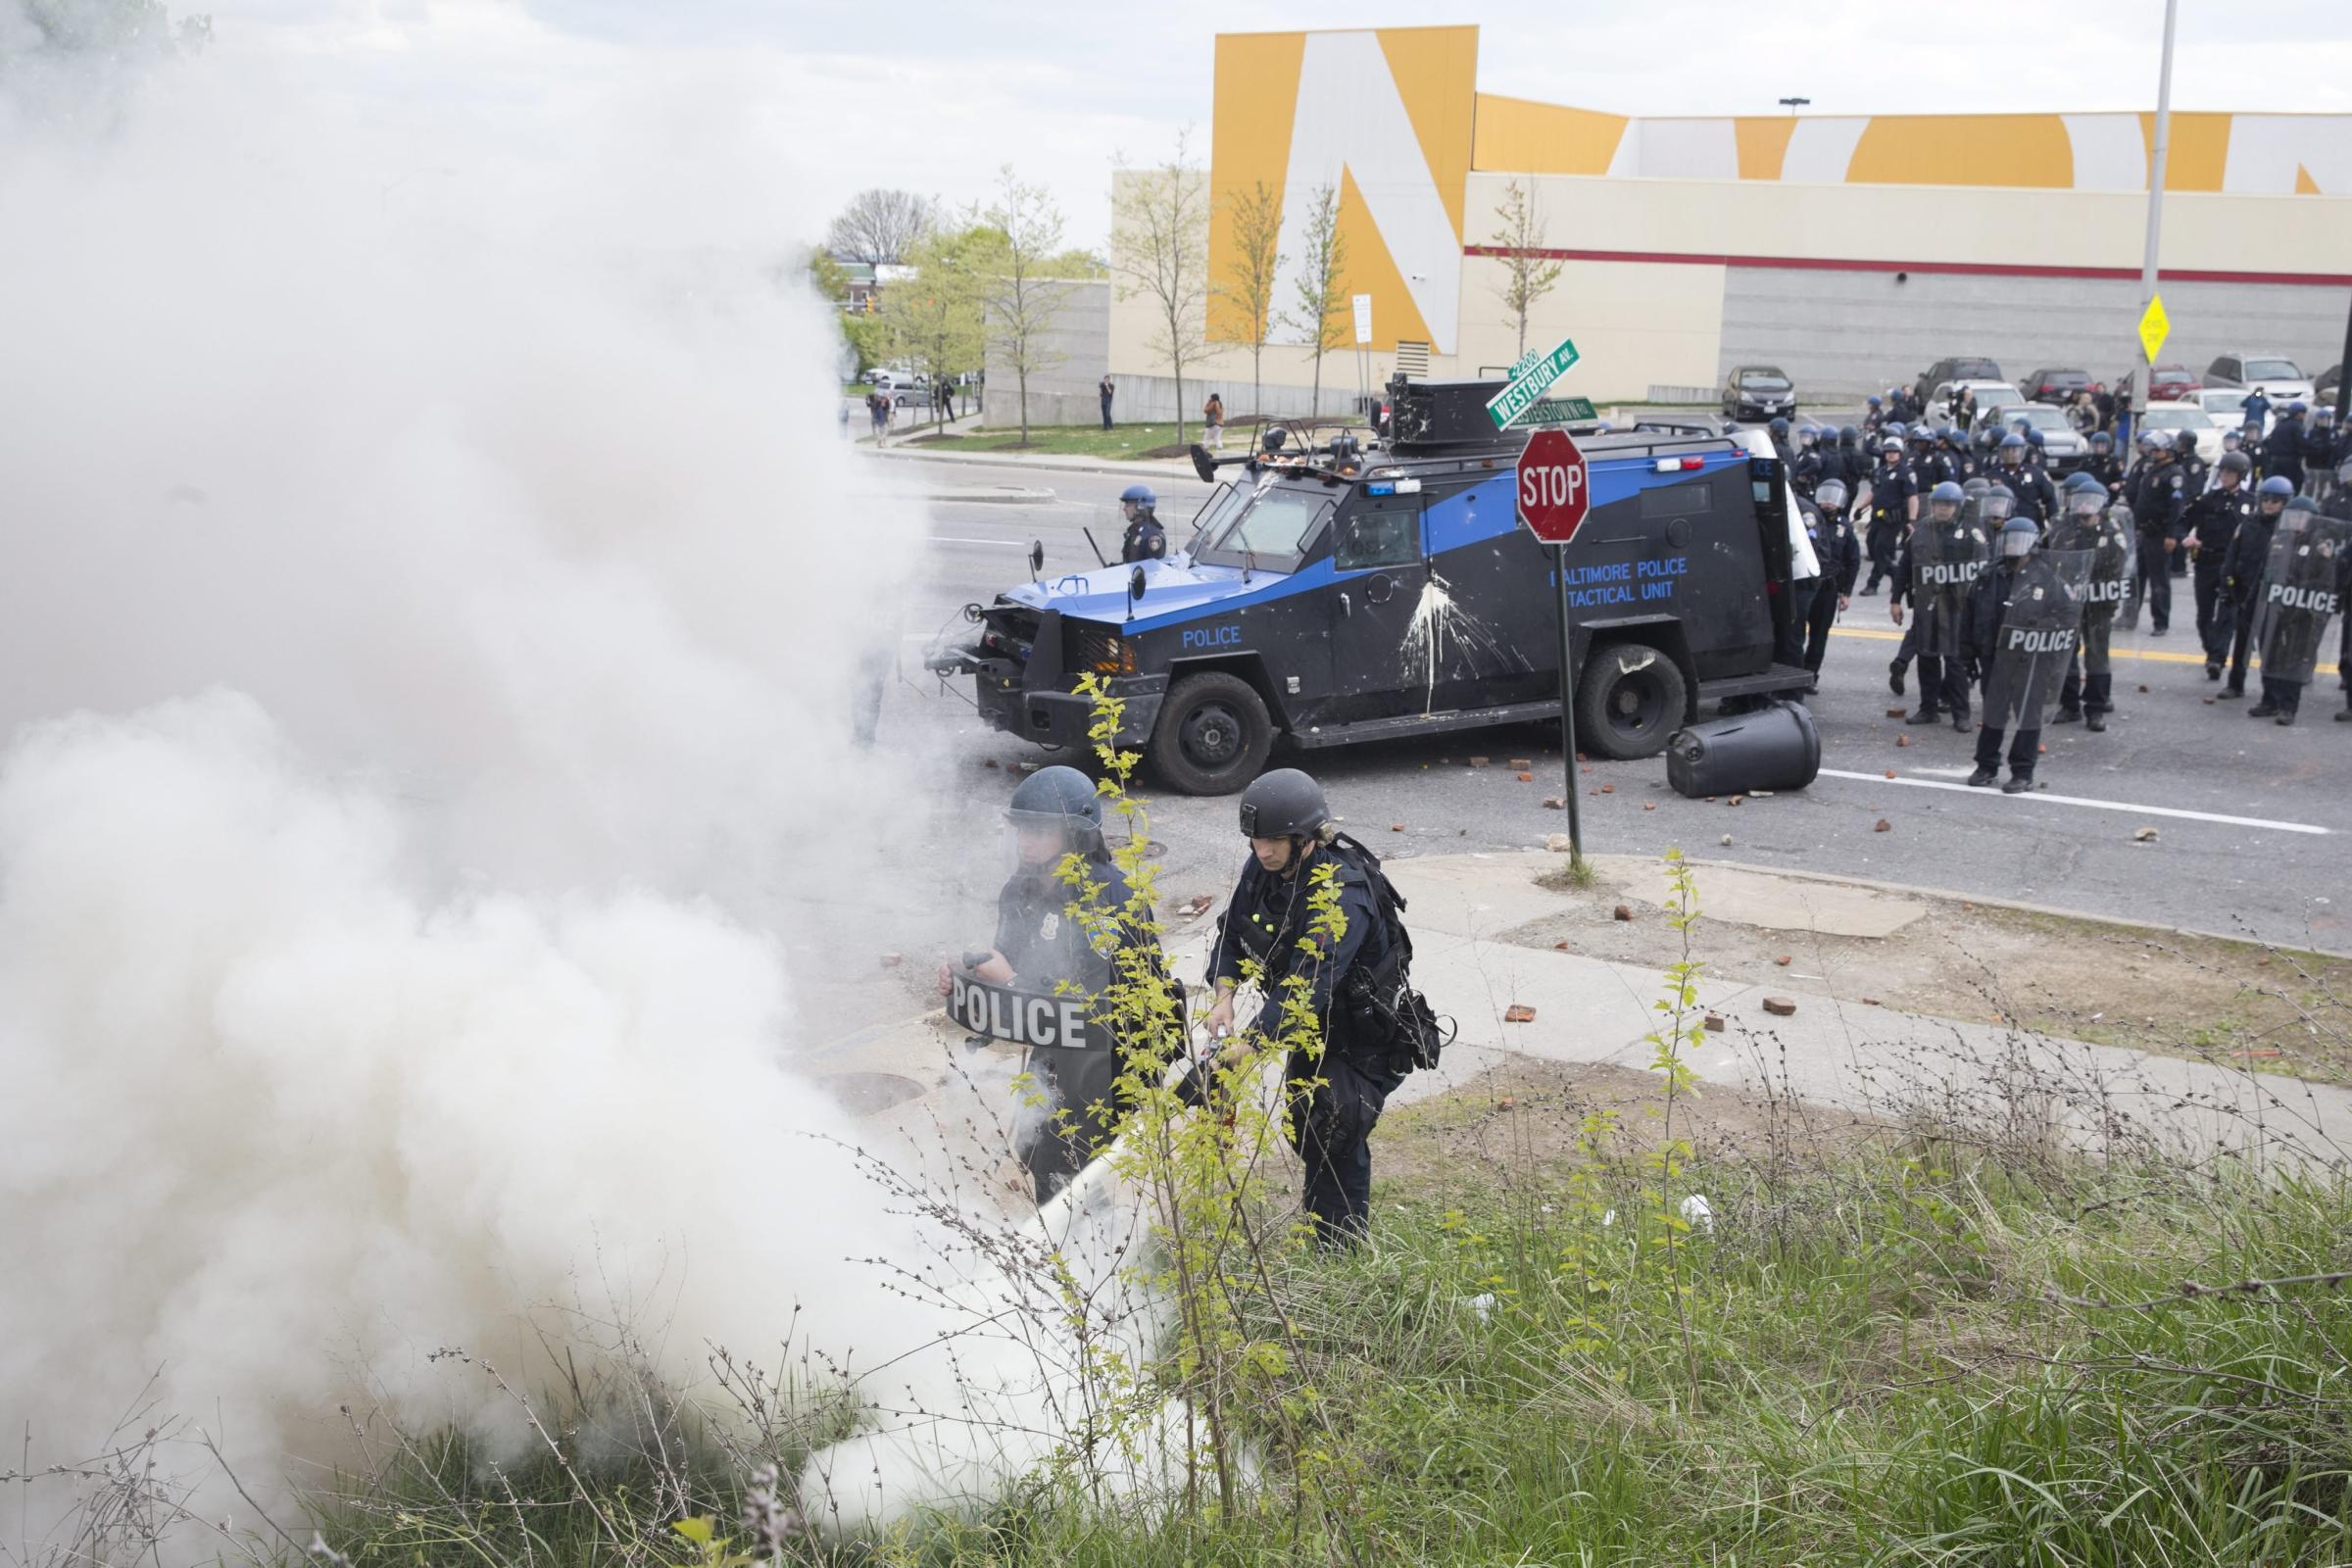 Police put out a fire while responding to people protesting after the funeral of Freddie Gray in Baltimore on April 27, 2015.